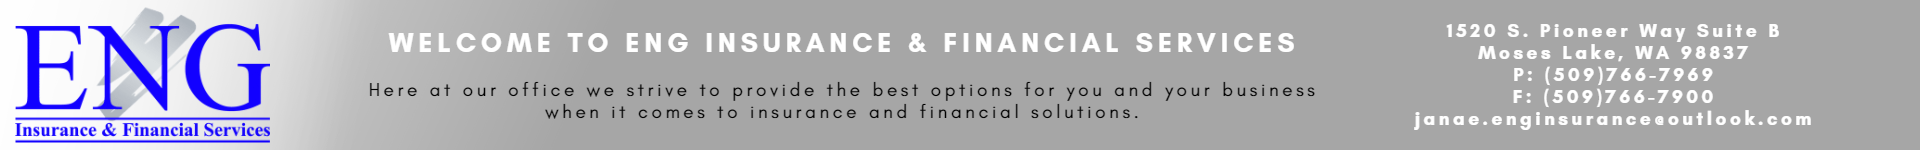 Eng Insurance & Financial Services